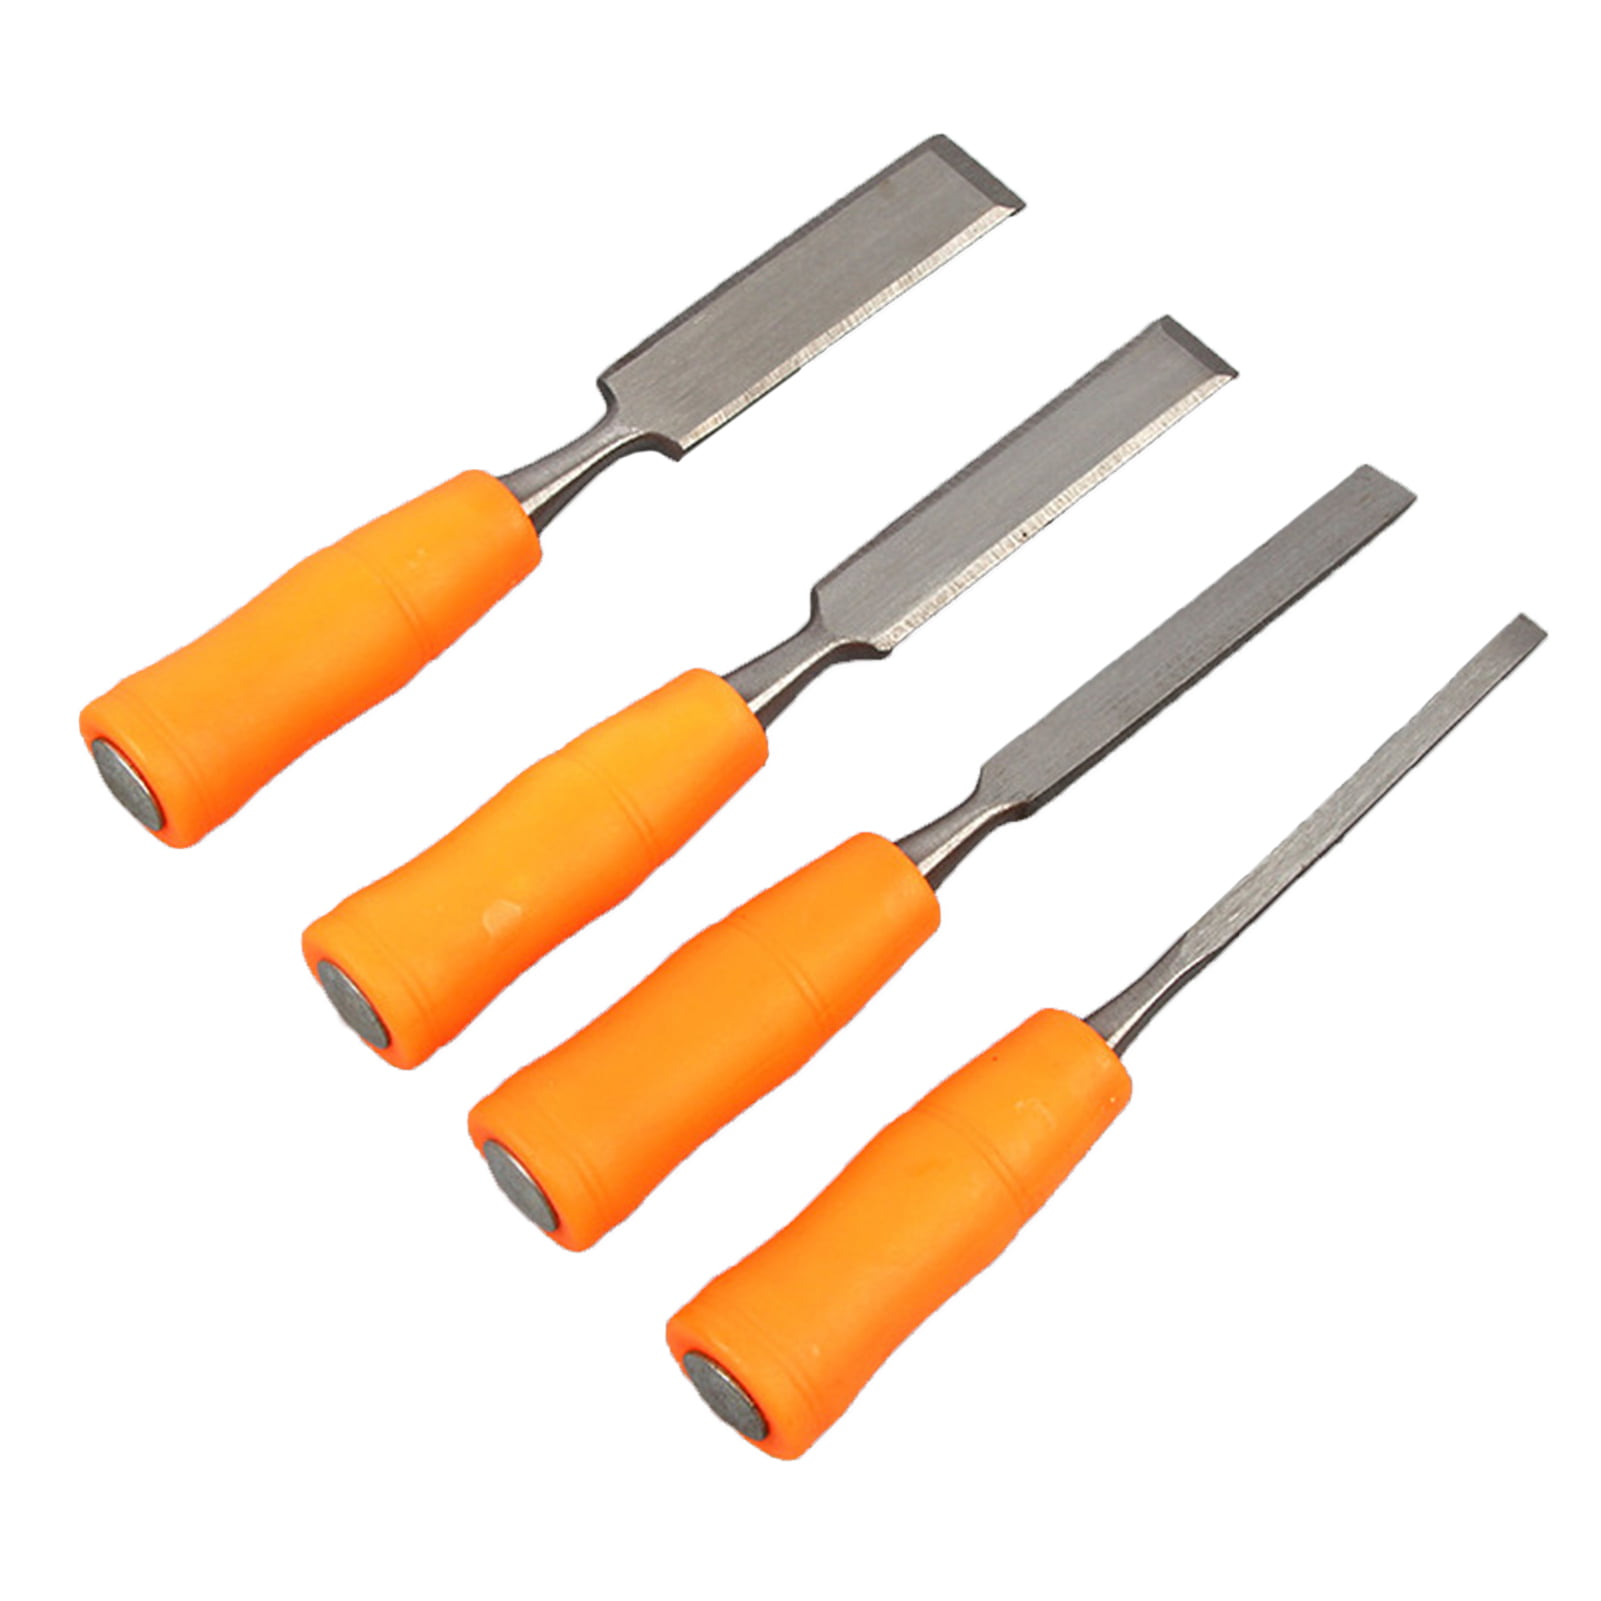 Brand New 4 Pc WOOD CHISEL SET  With Clear PVC Handle Woodworking 